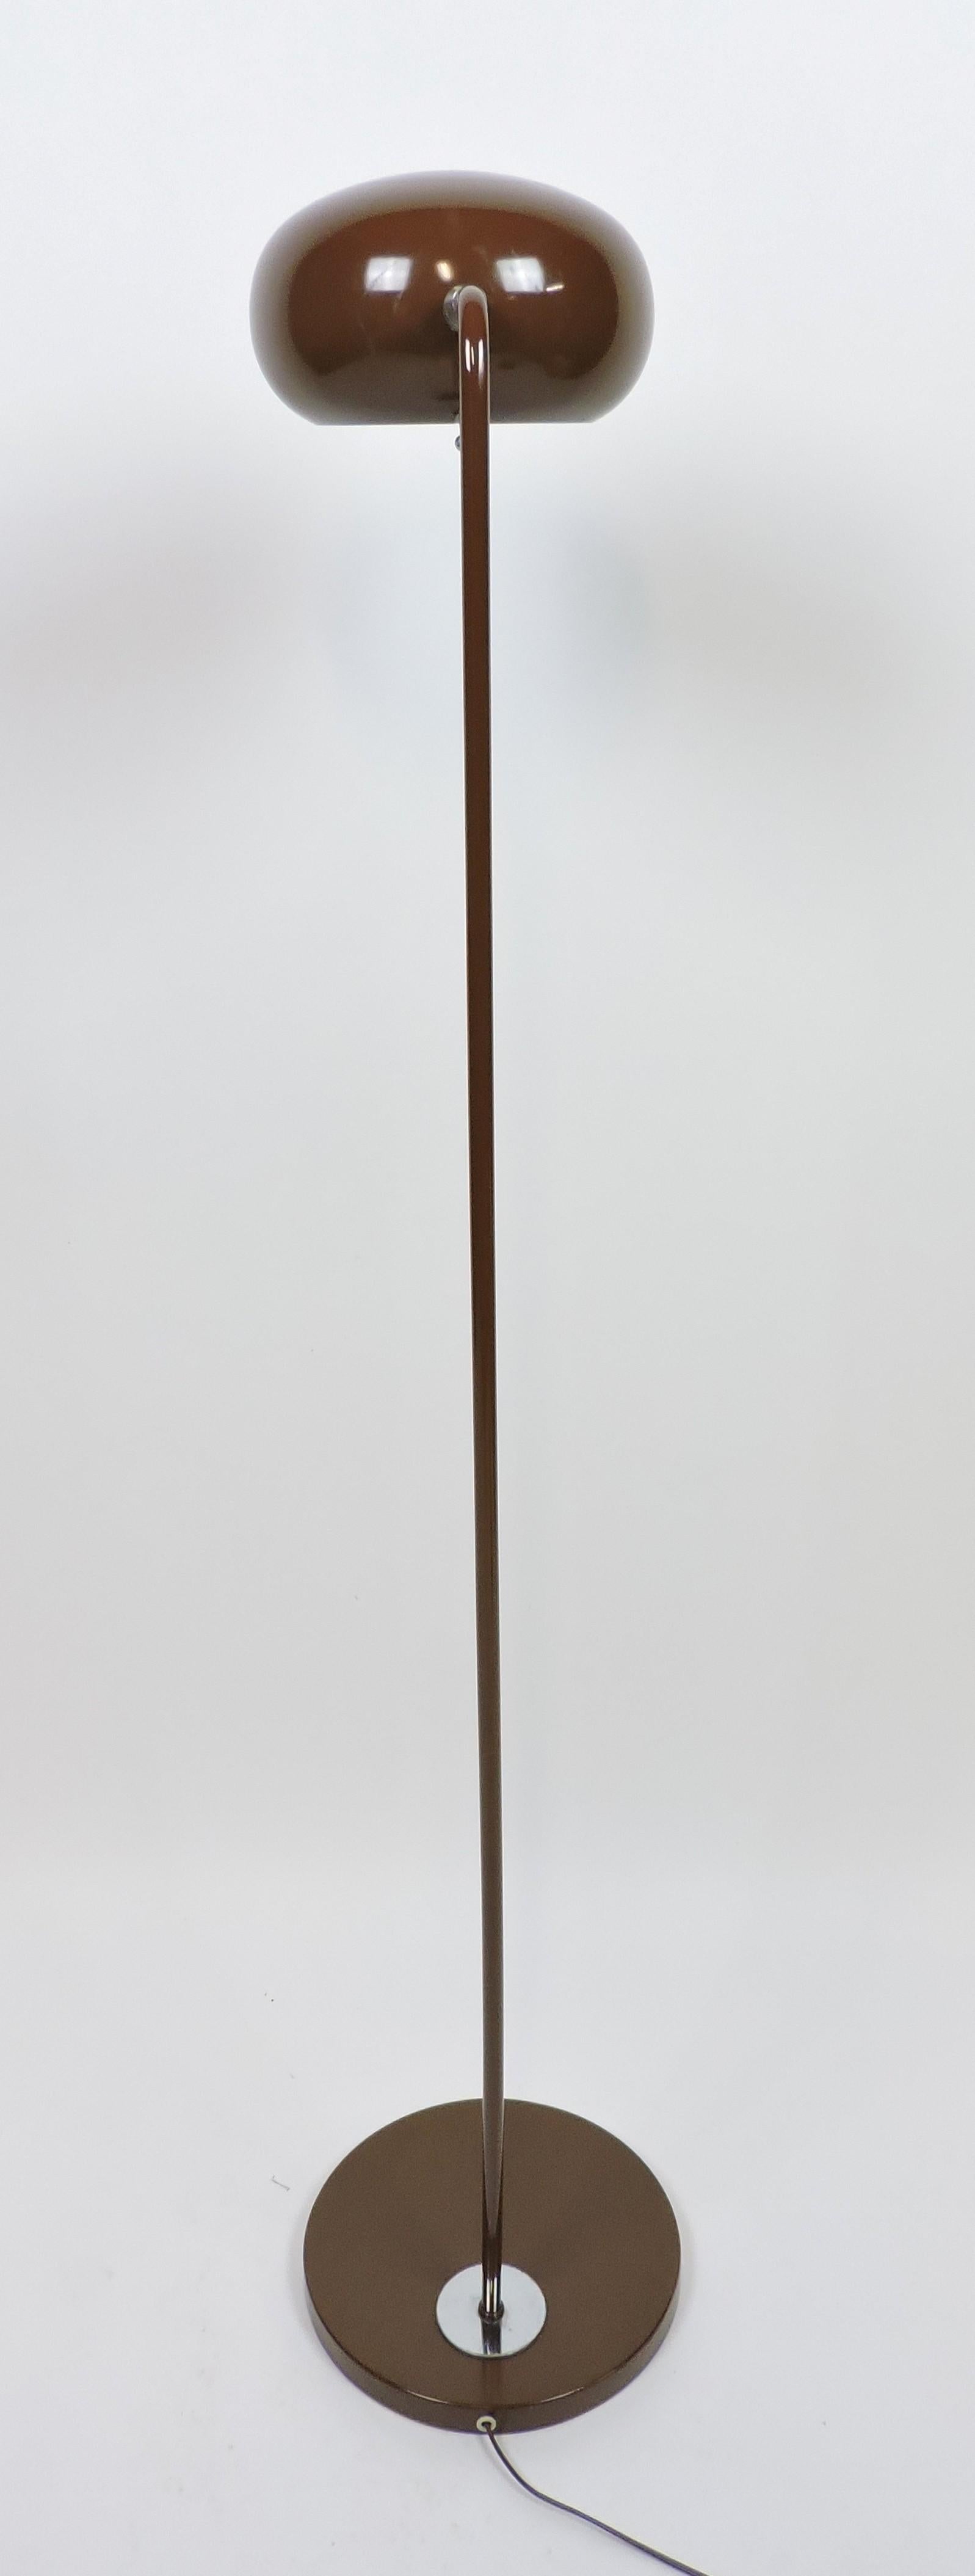 Mid-Century Modern Brown Enamel Metal Floor Lamp with Articulated Shade For Sale 1